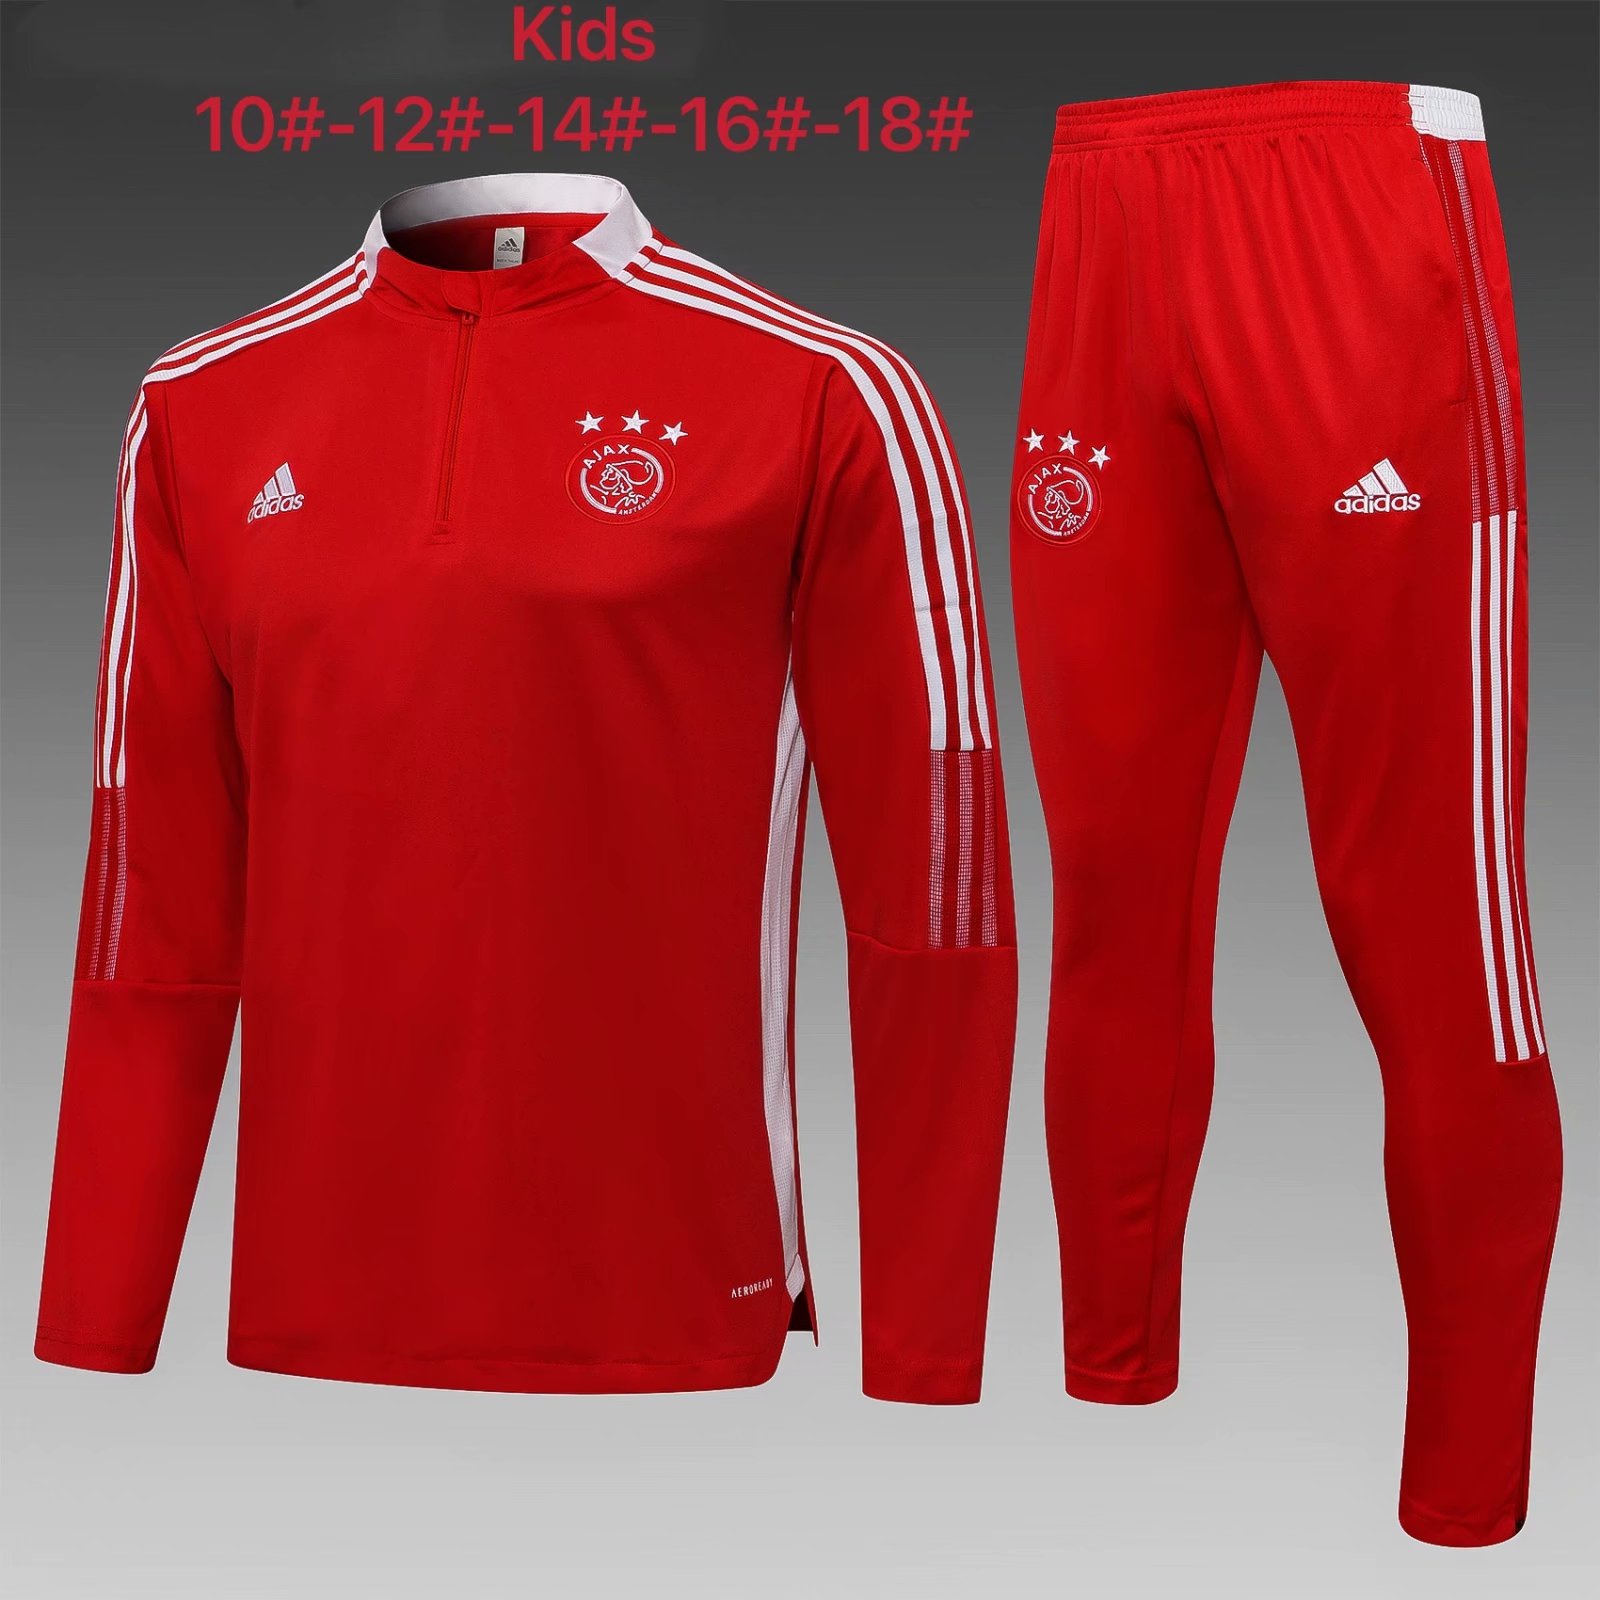 2021/22 Ajax Red Kids/Youth Tracksuit Uniform-815